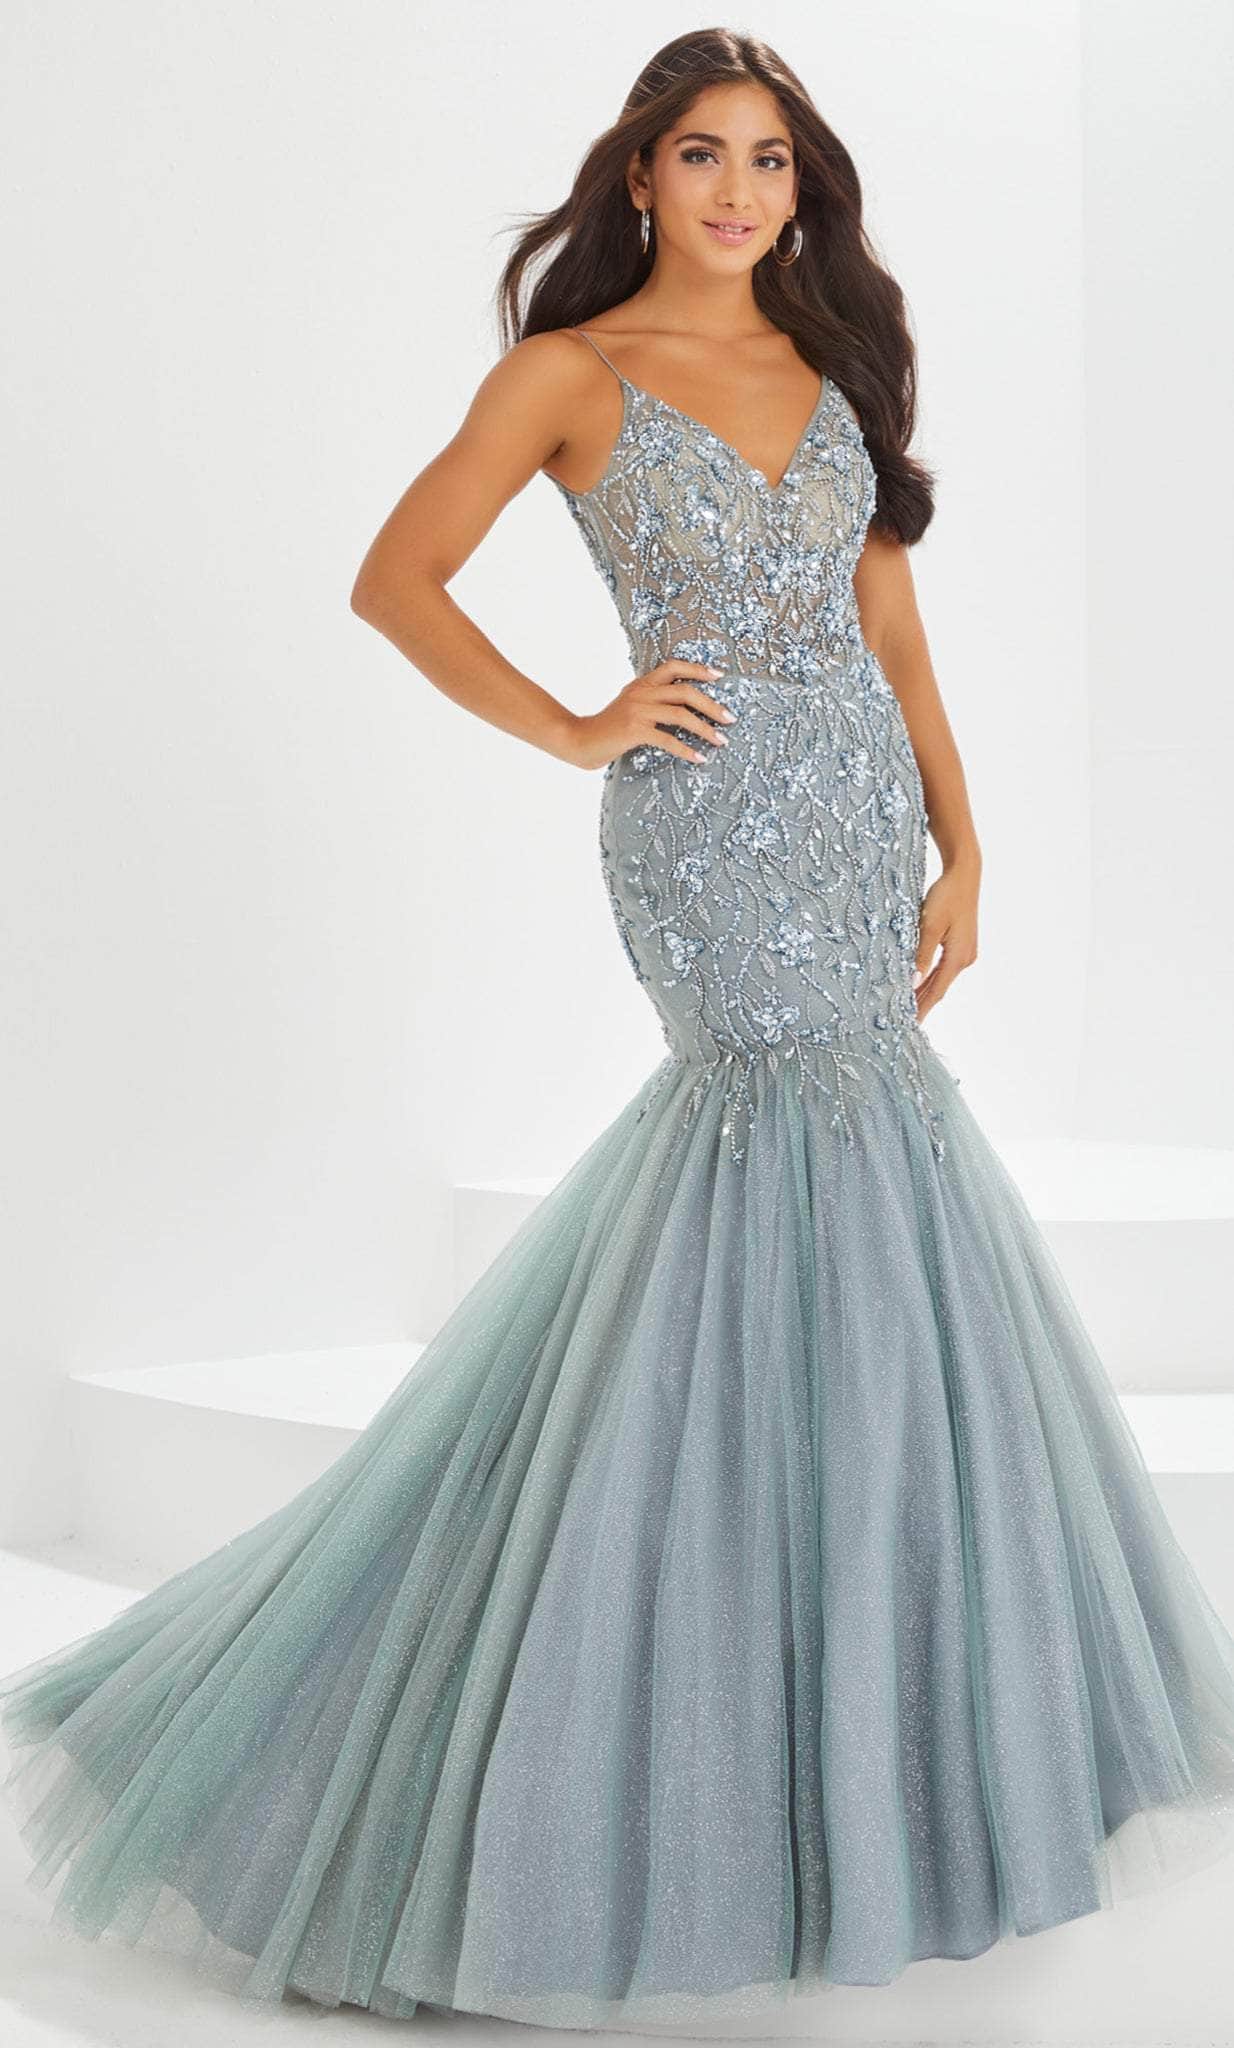 Image of Tiffany Designs by Christina Wu 16025 - Mermaid Tulle Prom Gown